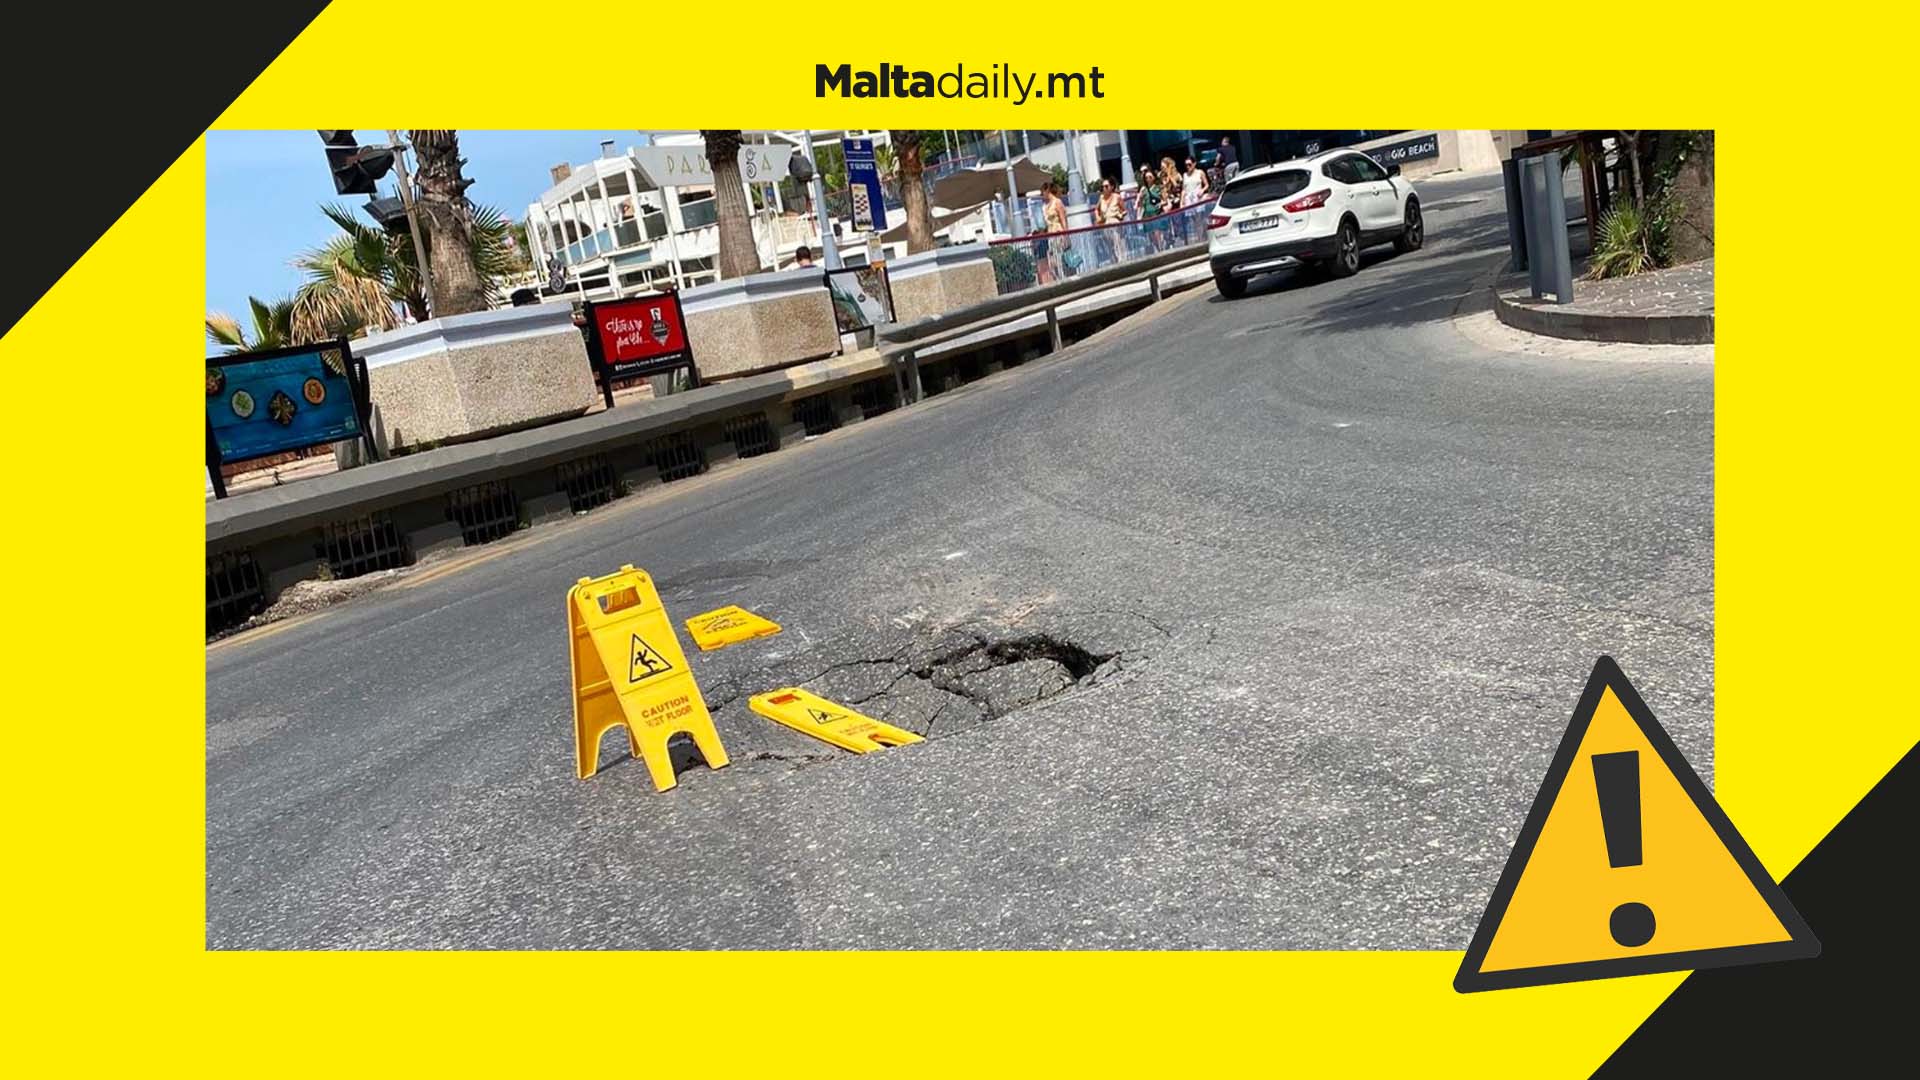 Caution advised as large hole appears in major St. Julian's road